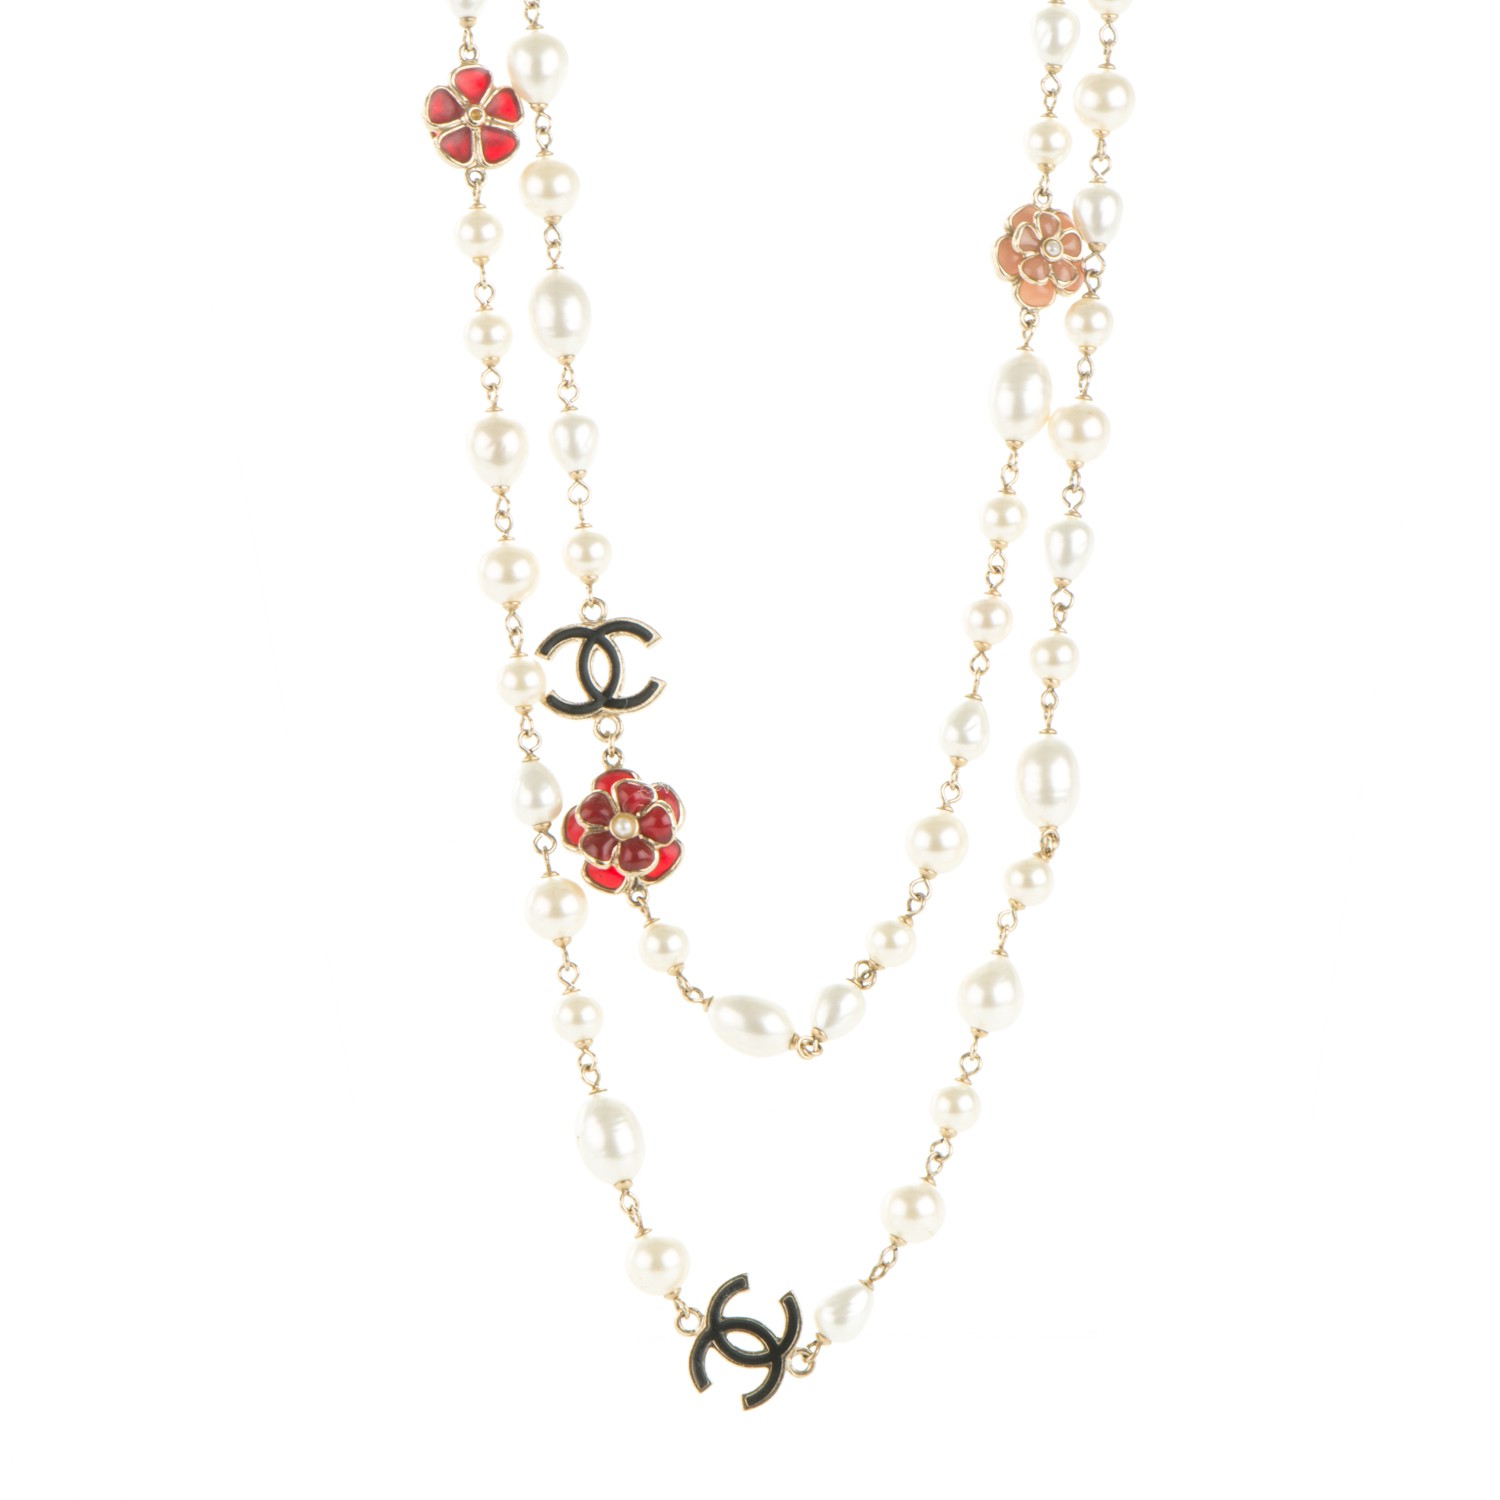 CHANEL Pearl Enamel CC Camellia Long Necklace Black Red Gold 178679